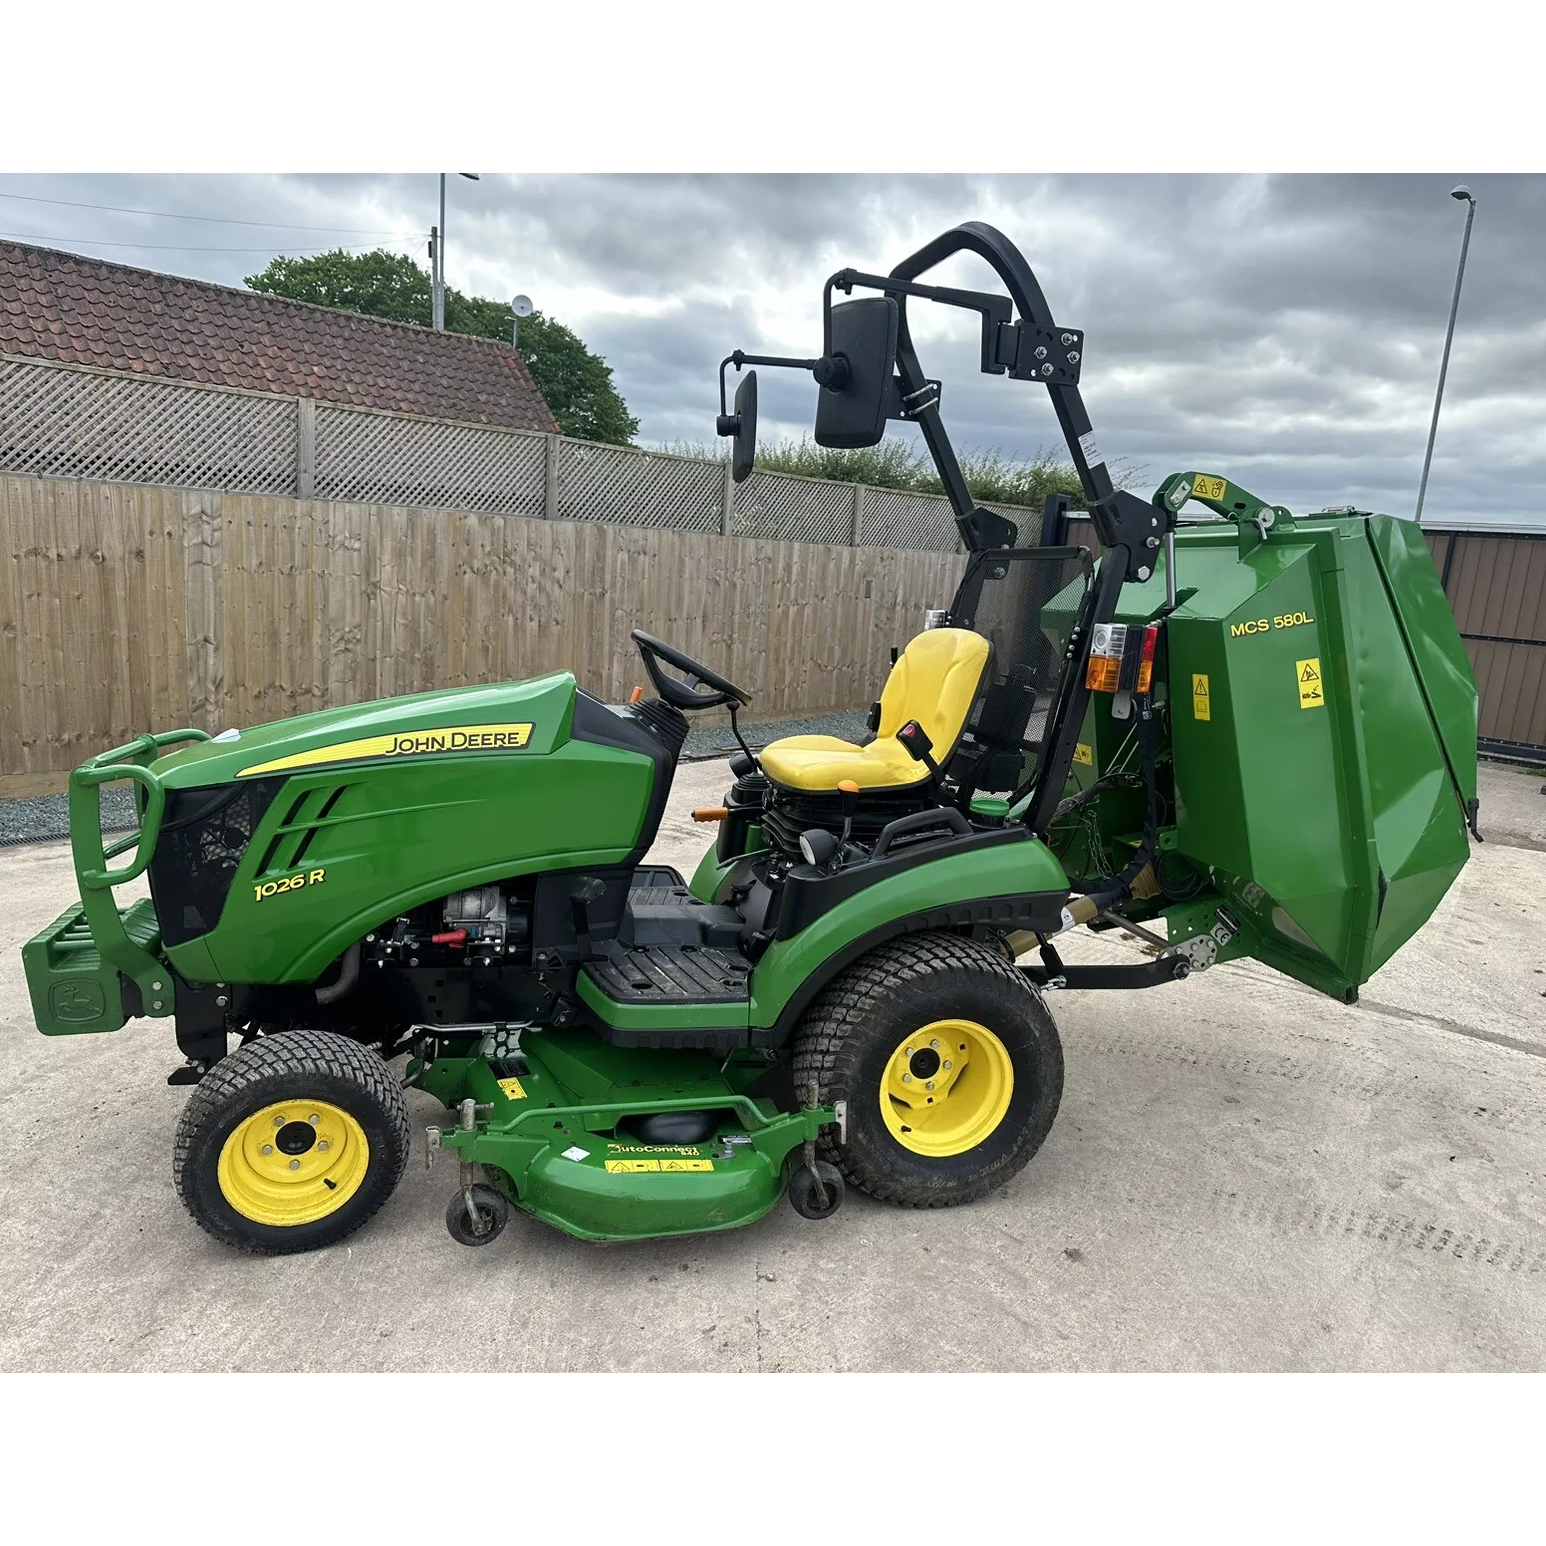 2019 JOHN DEERE 1026R COMPACT TRACTOR WITH RIDE ON LAWN MOWER DECK & COLLECTOR